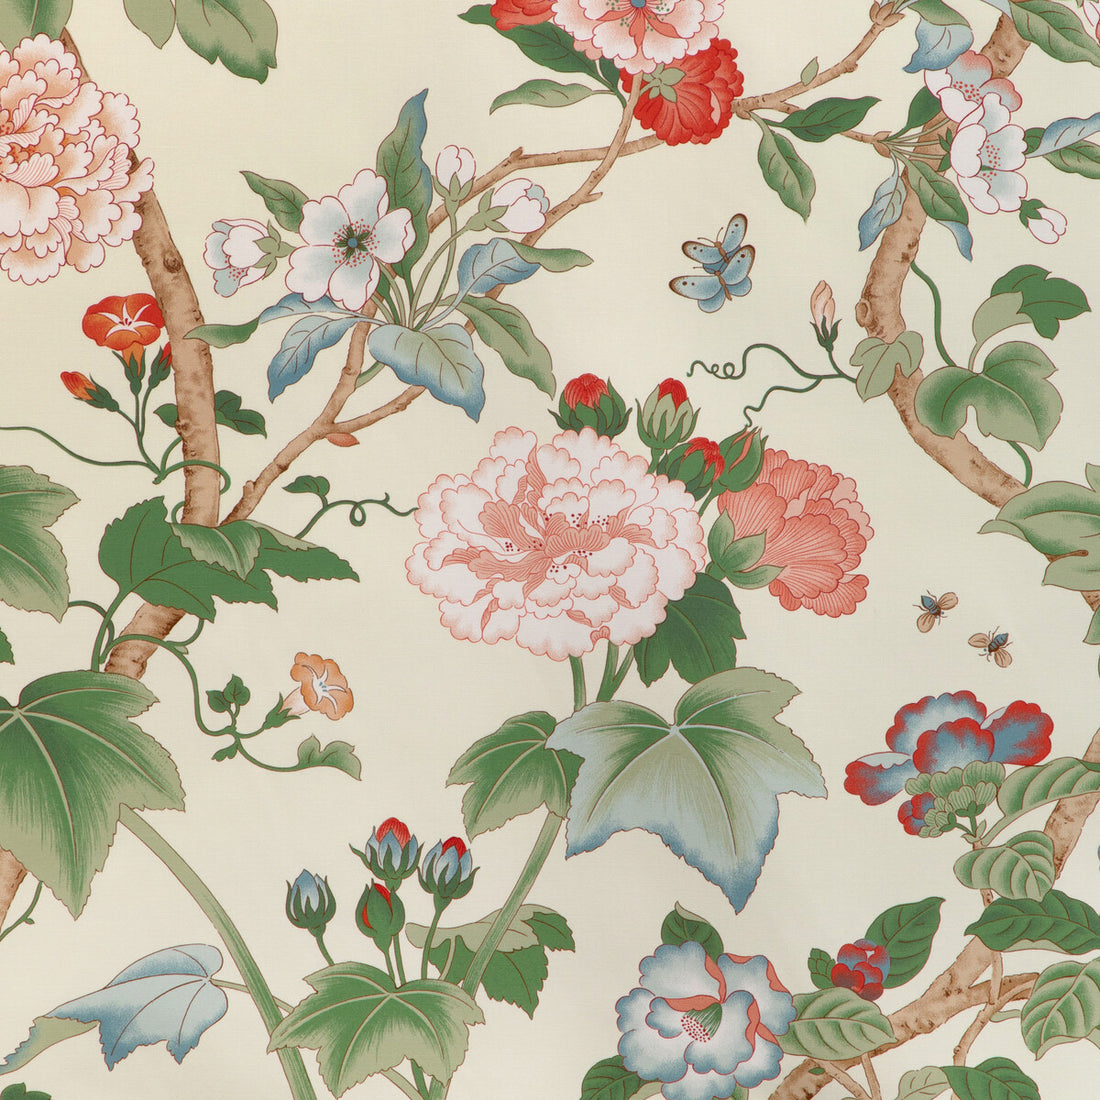 Gardenia Print fabric in red/green color - pattern 2023143.319.0 - by Lee Jofa in the Garden Walk collection